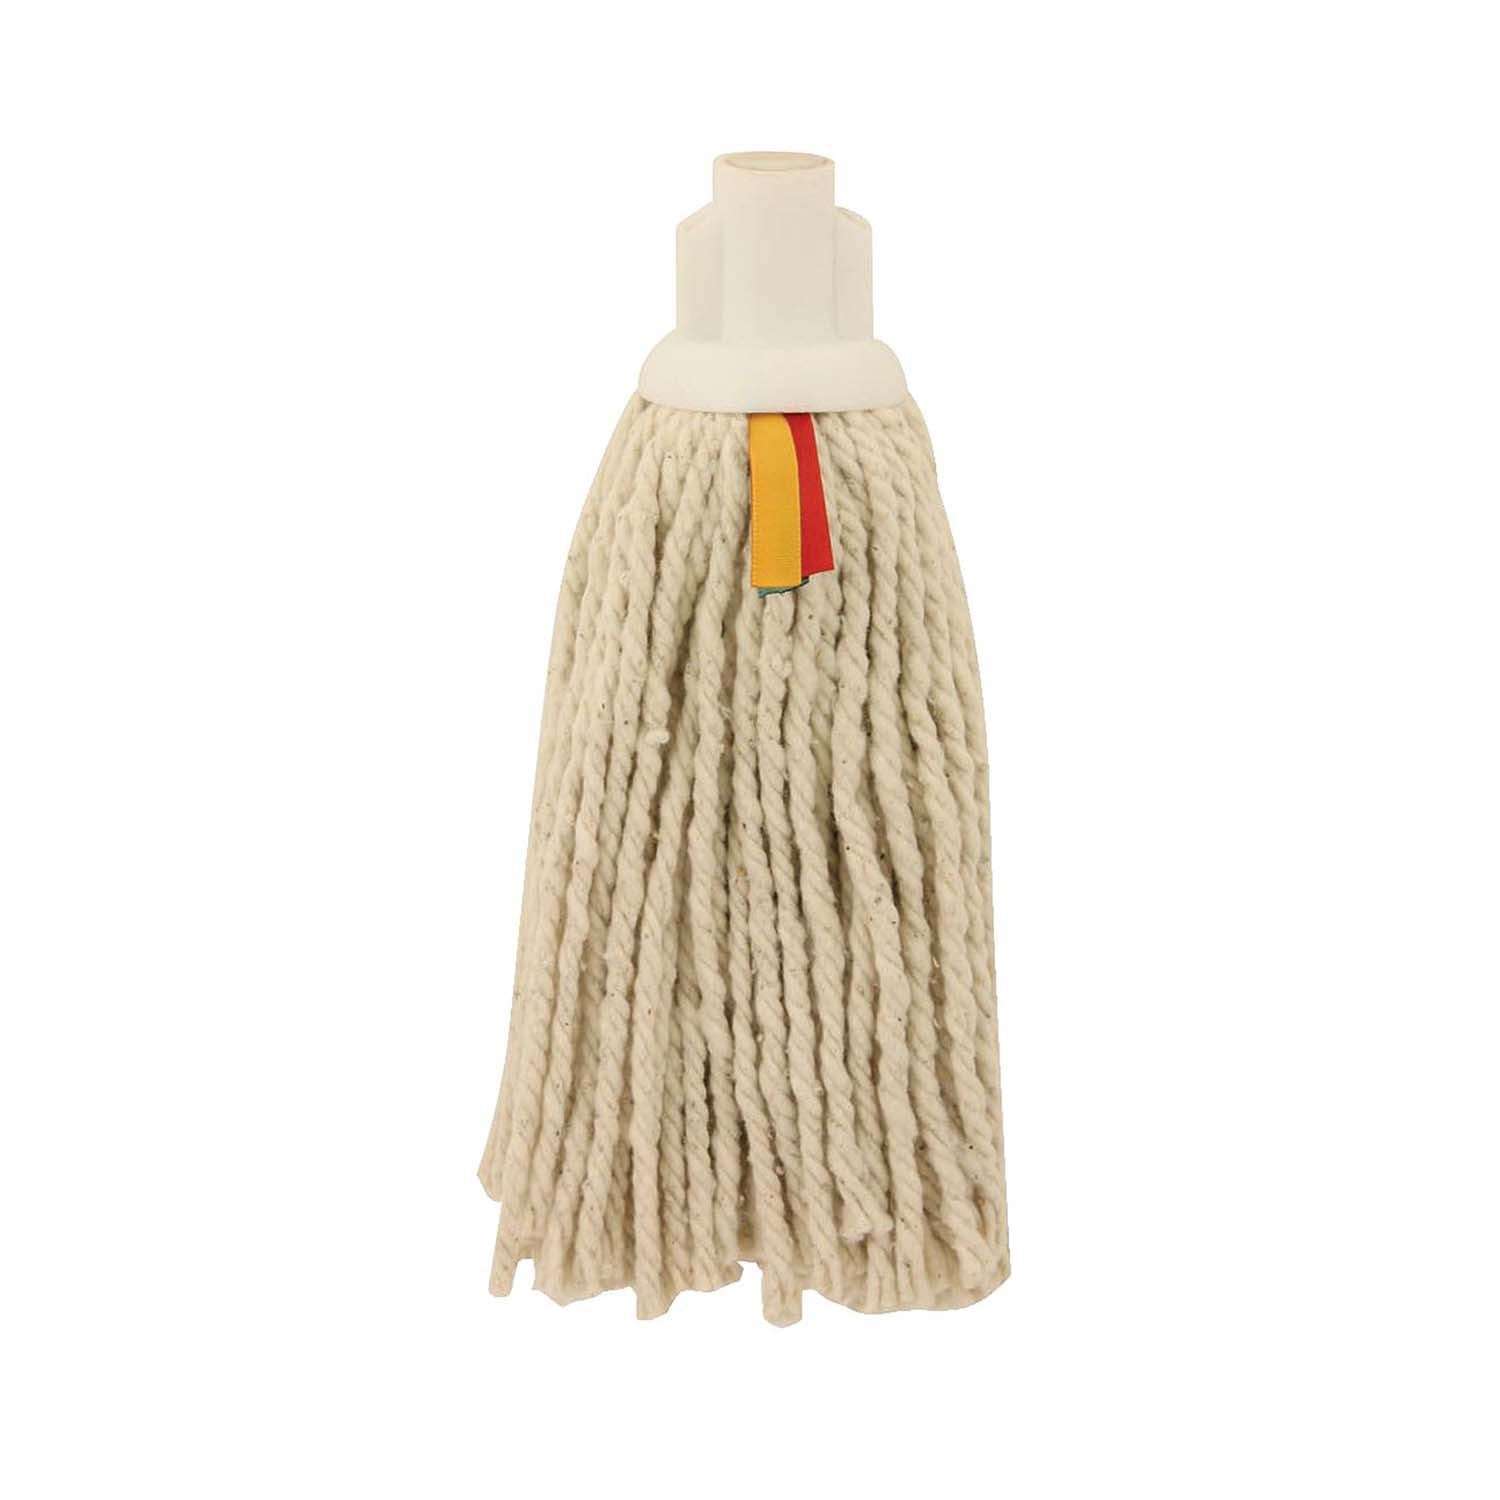 KleenMe Socket Mop with Tags